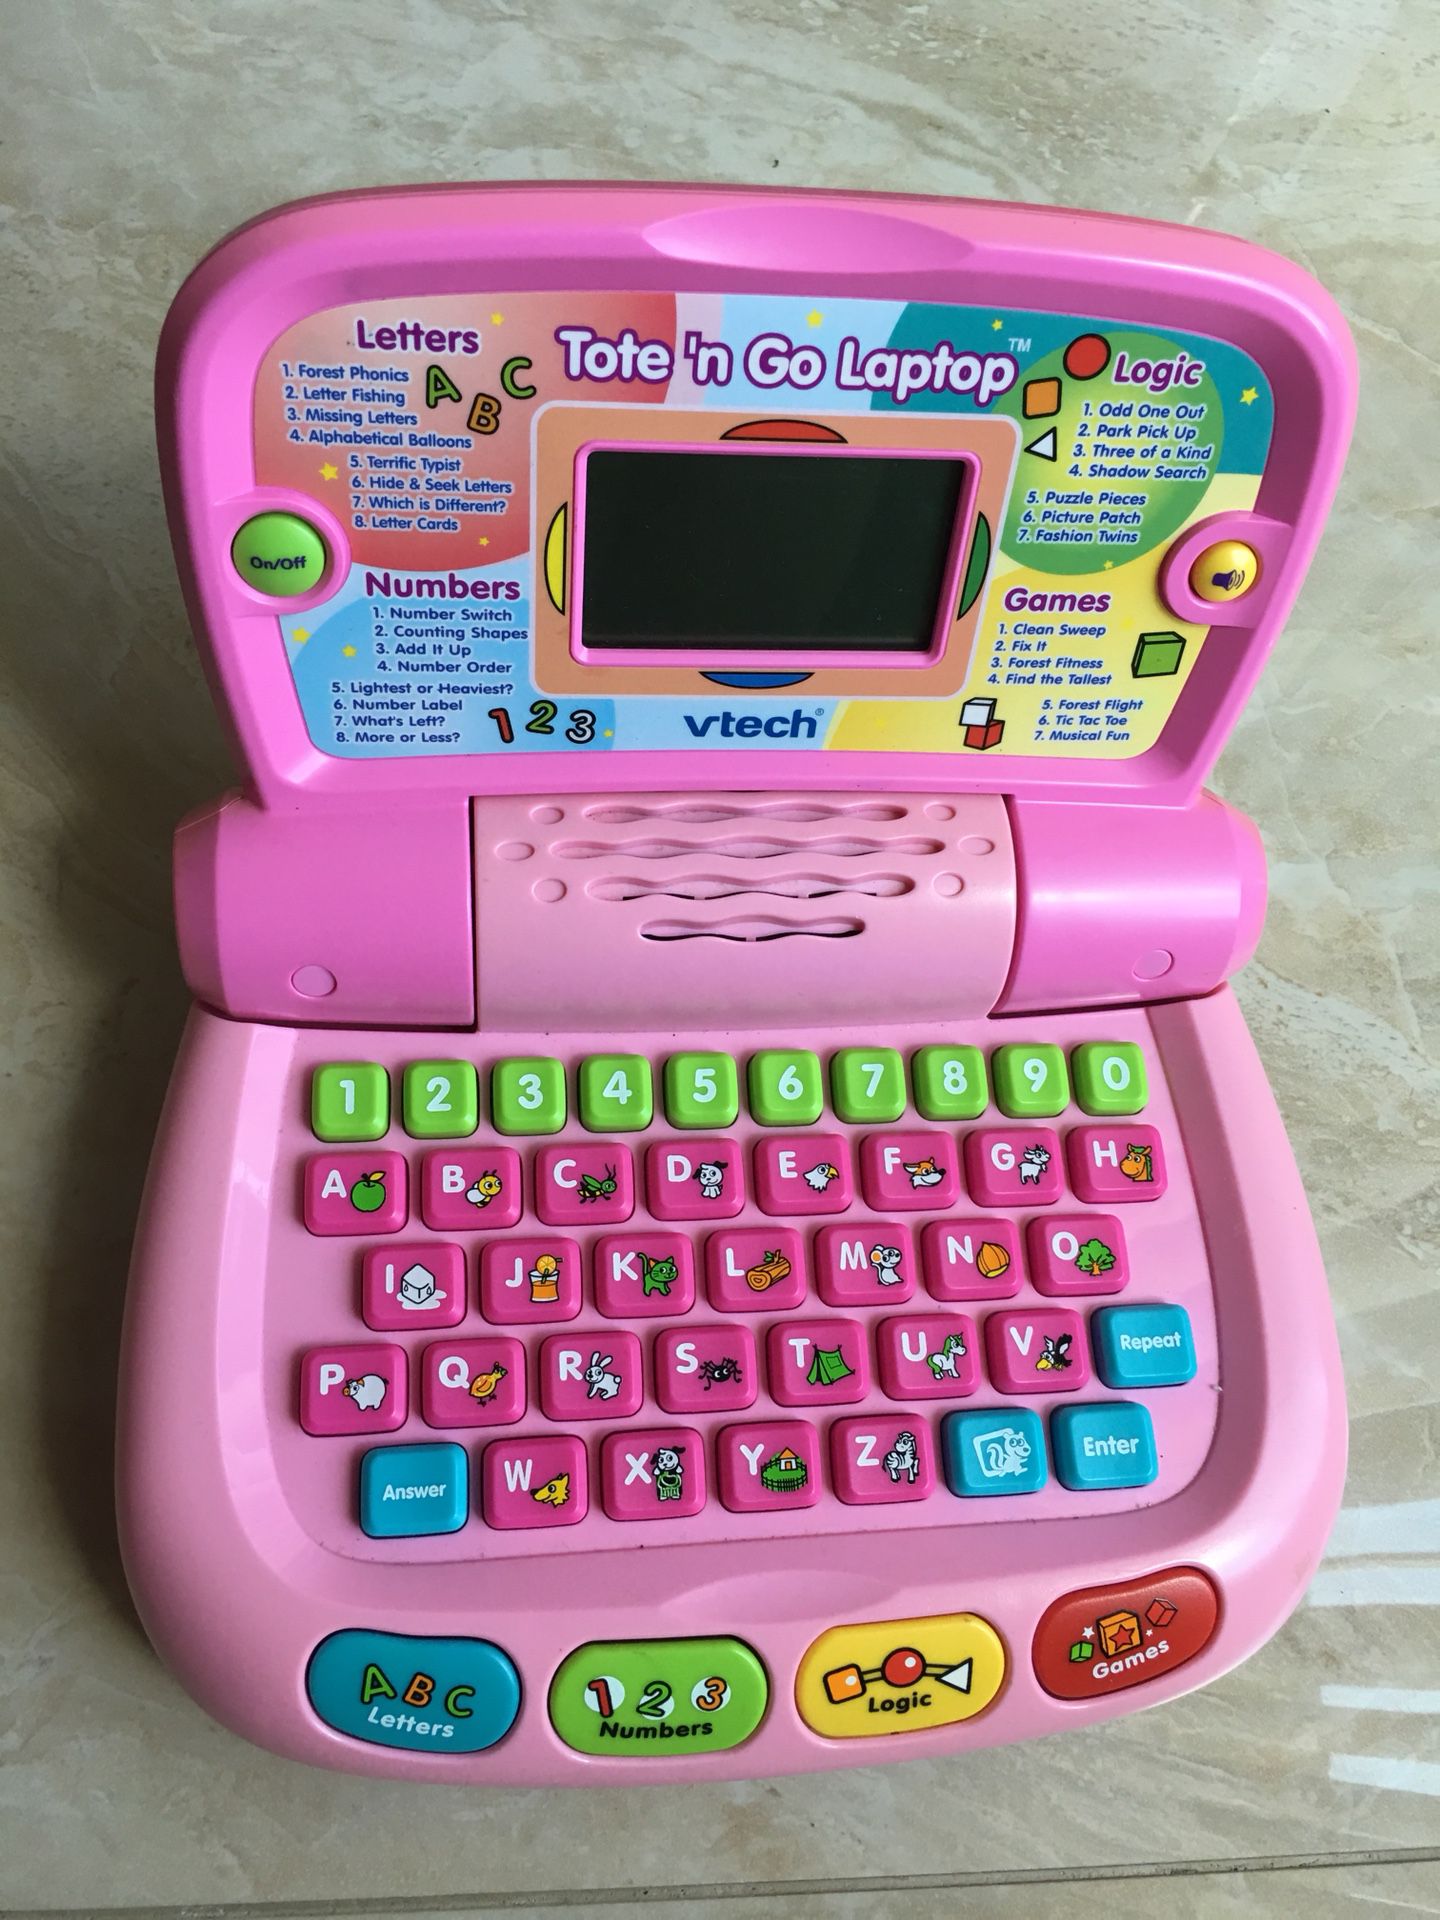 VTech Tote and Go Laptop - Pink 